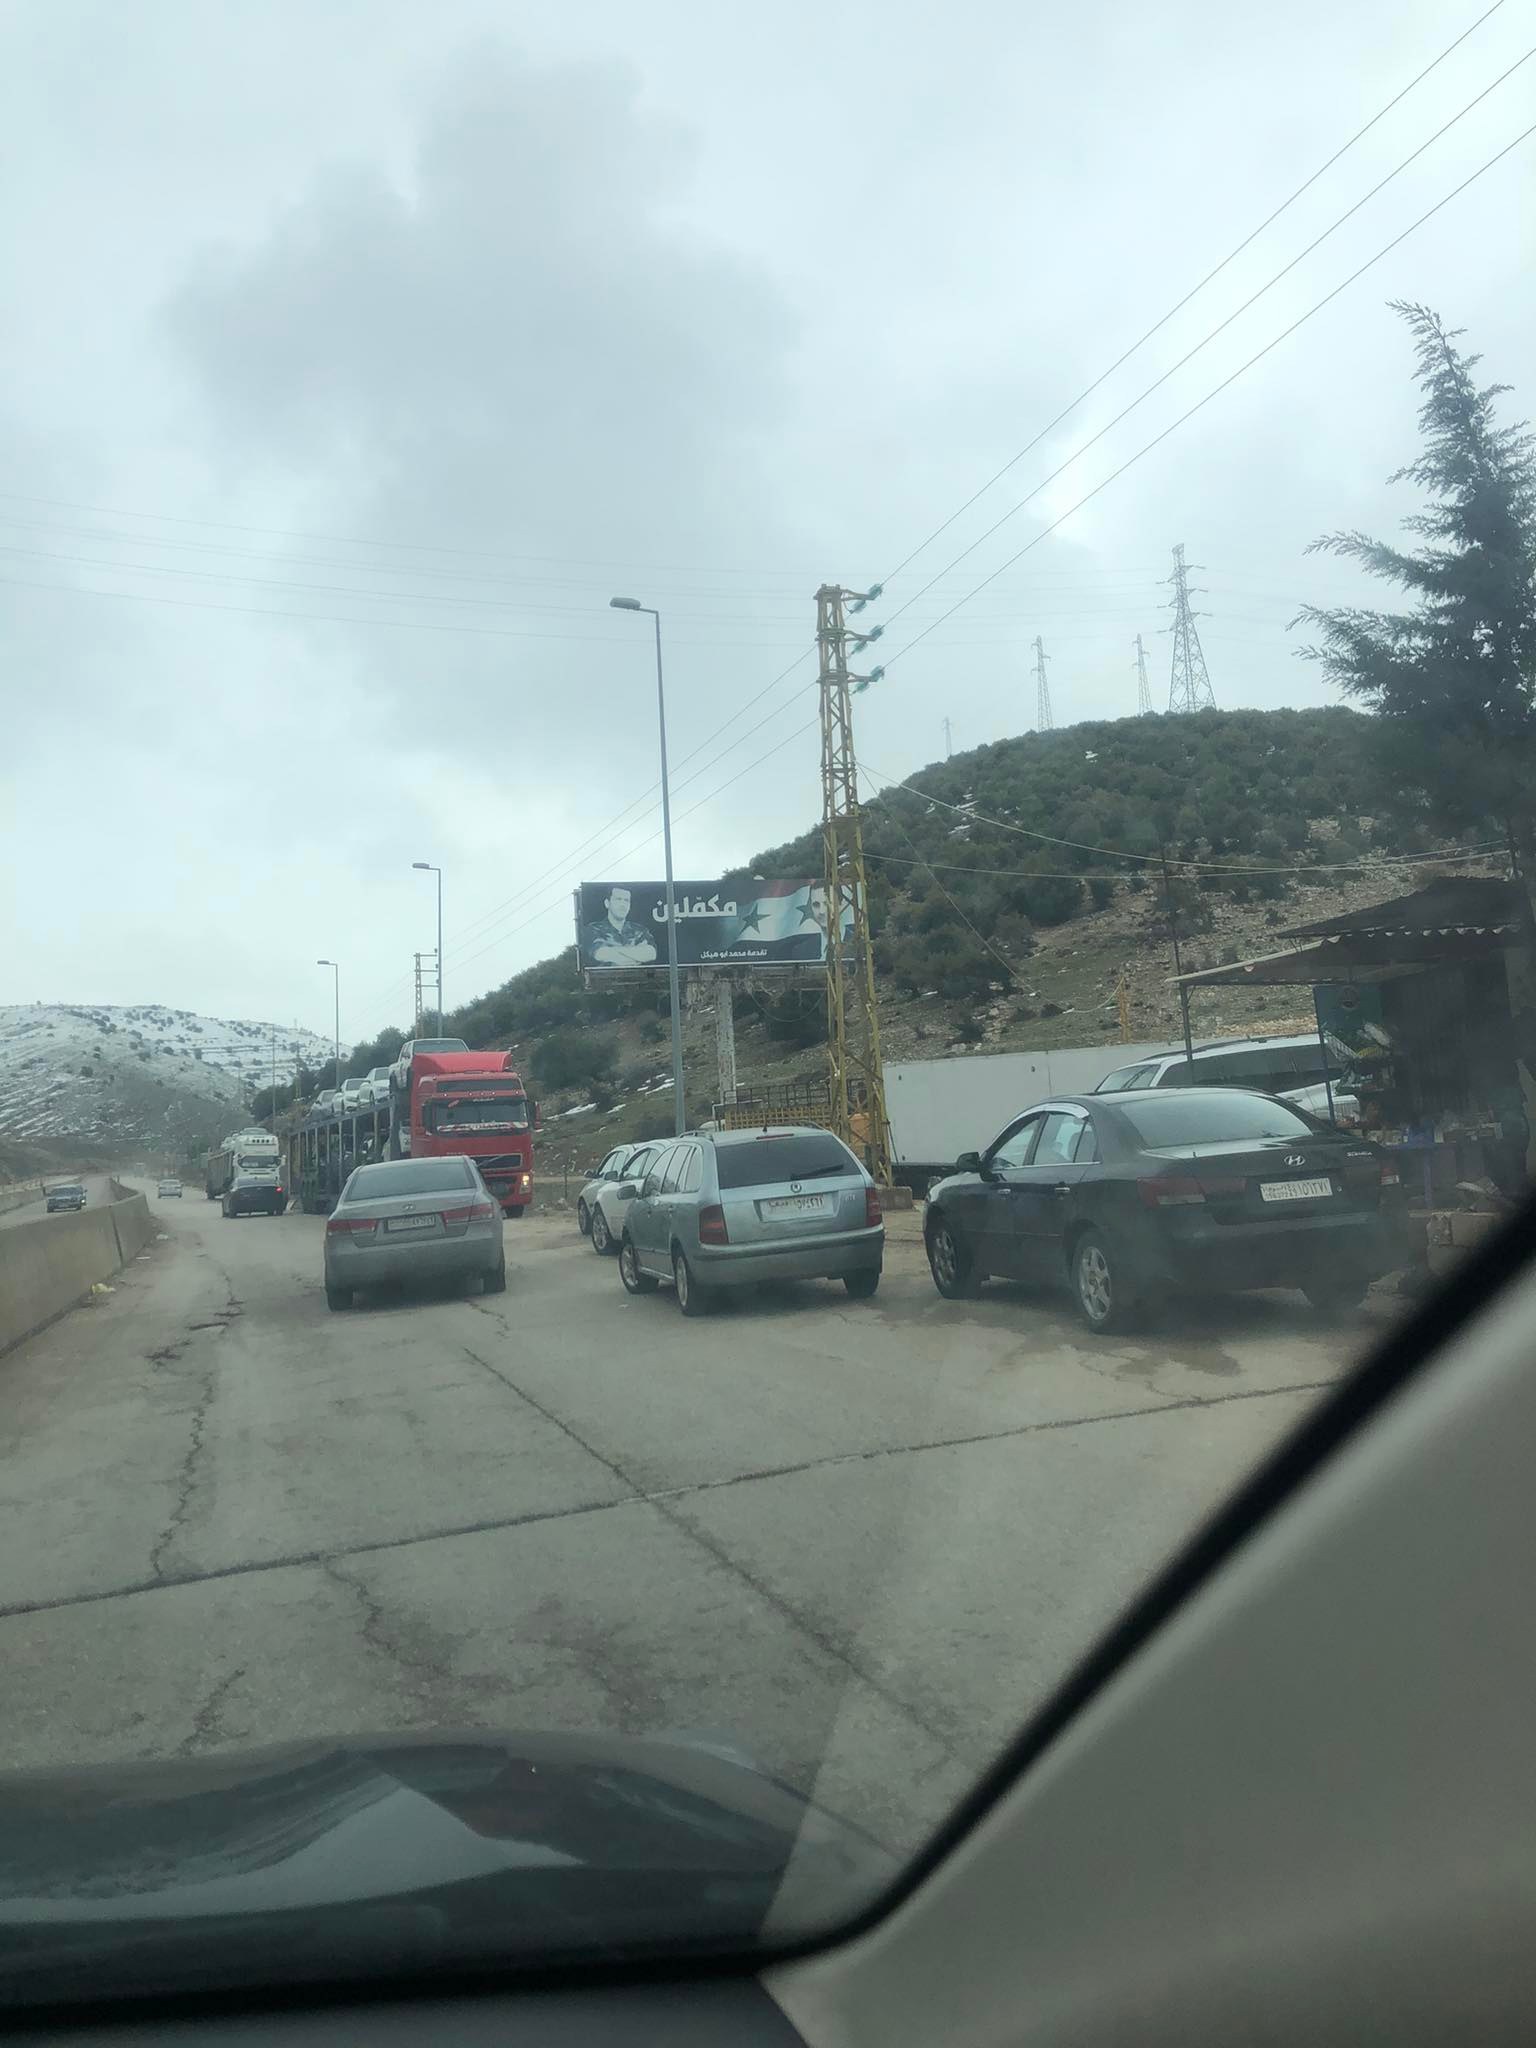 Crossing the border from Lebanon to Syria